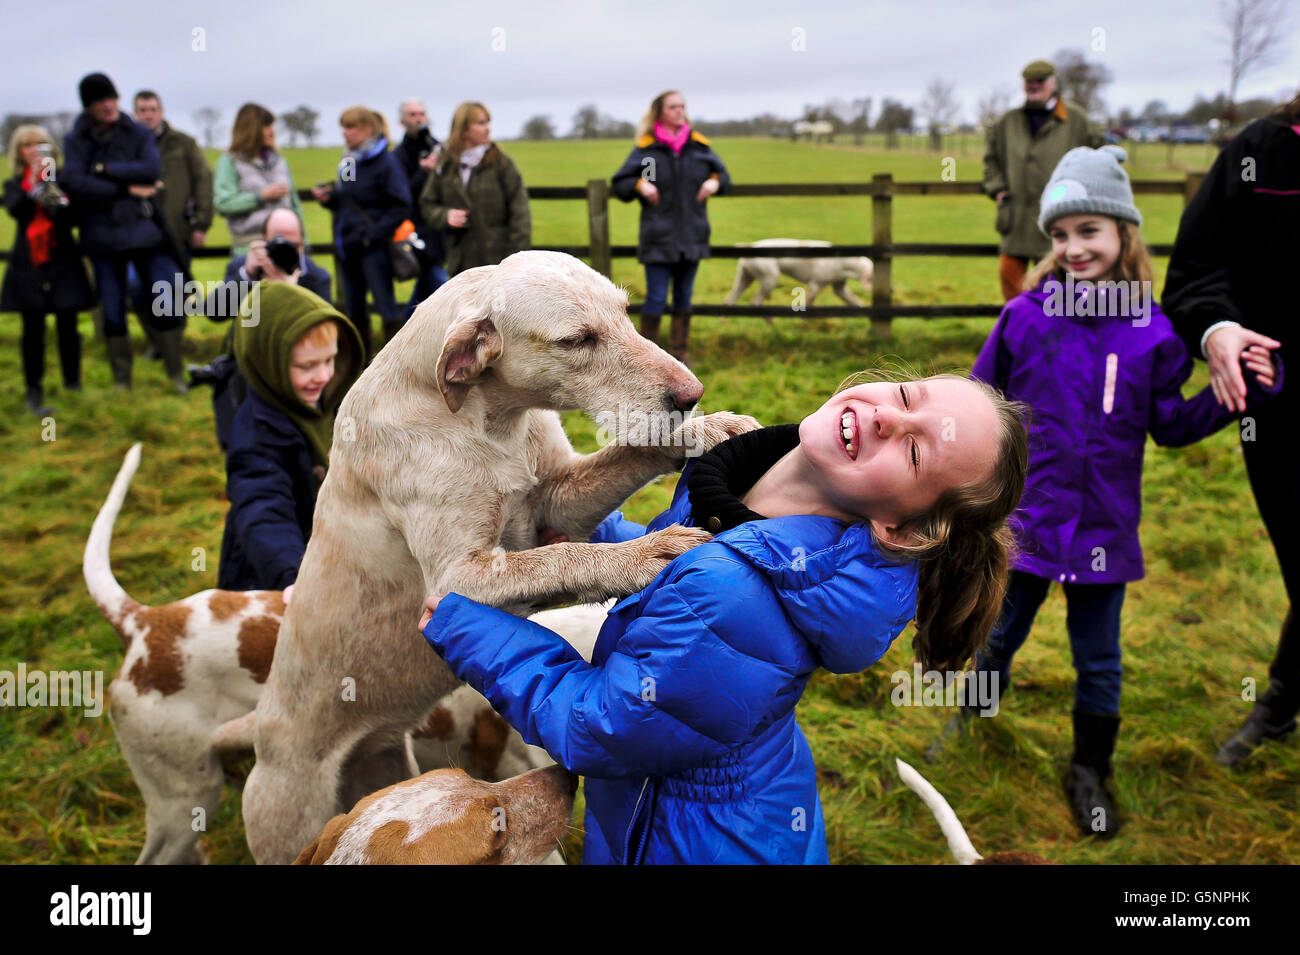 Bliss Gooding, 8, from Connecticut, USA, who is spending Christmas in the UK, is greeted by hounds outside the dog kennels at Badminton, Gloucestershire, prior to the start of the annual Boxing Day Beaufort Hunt. Stock Photo